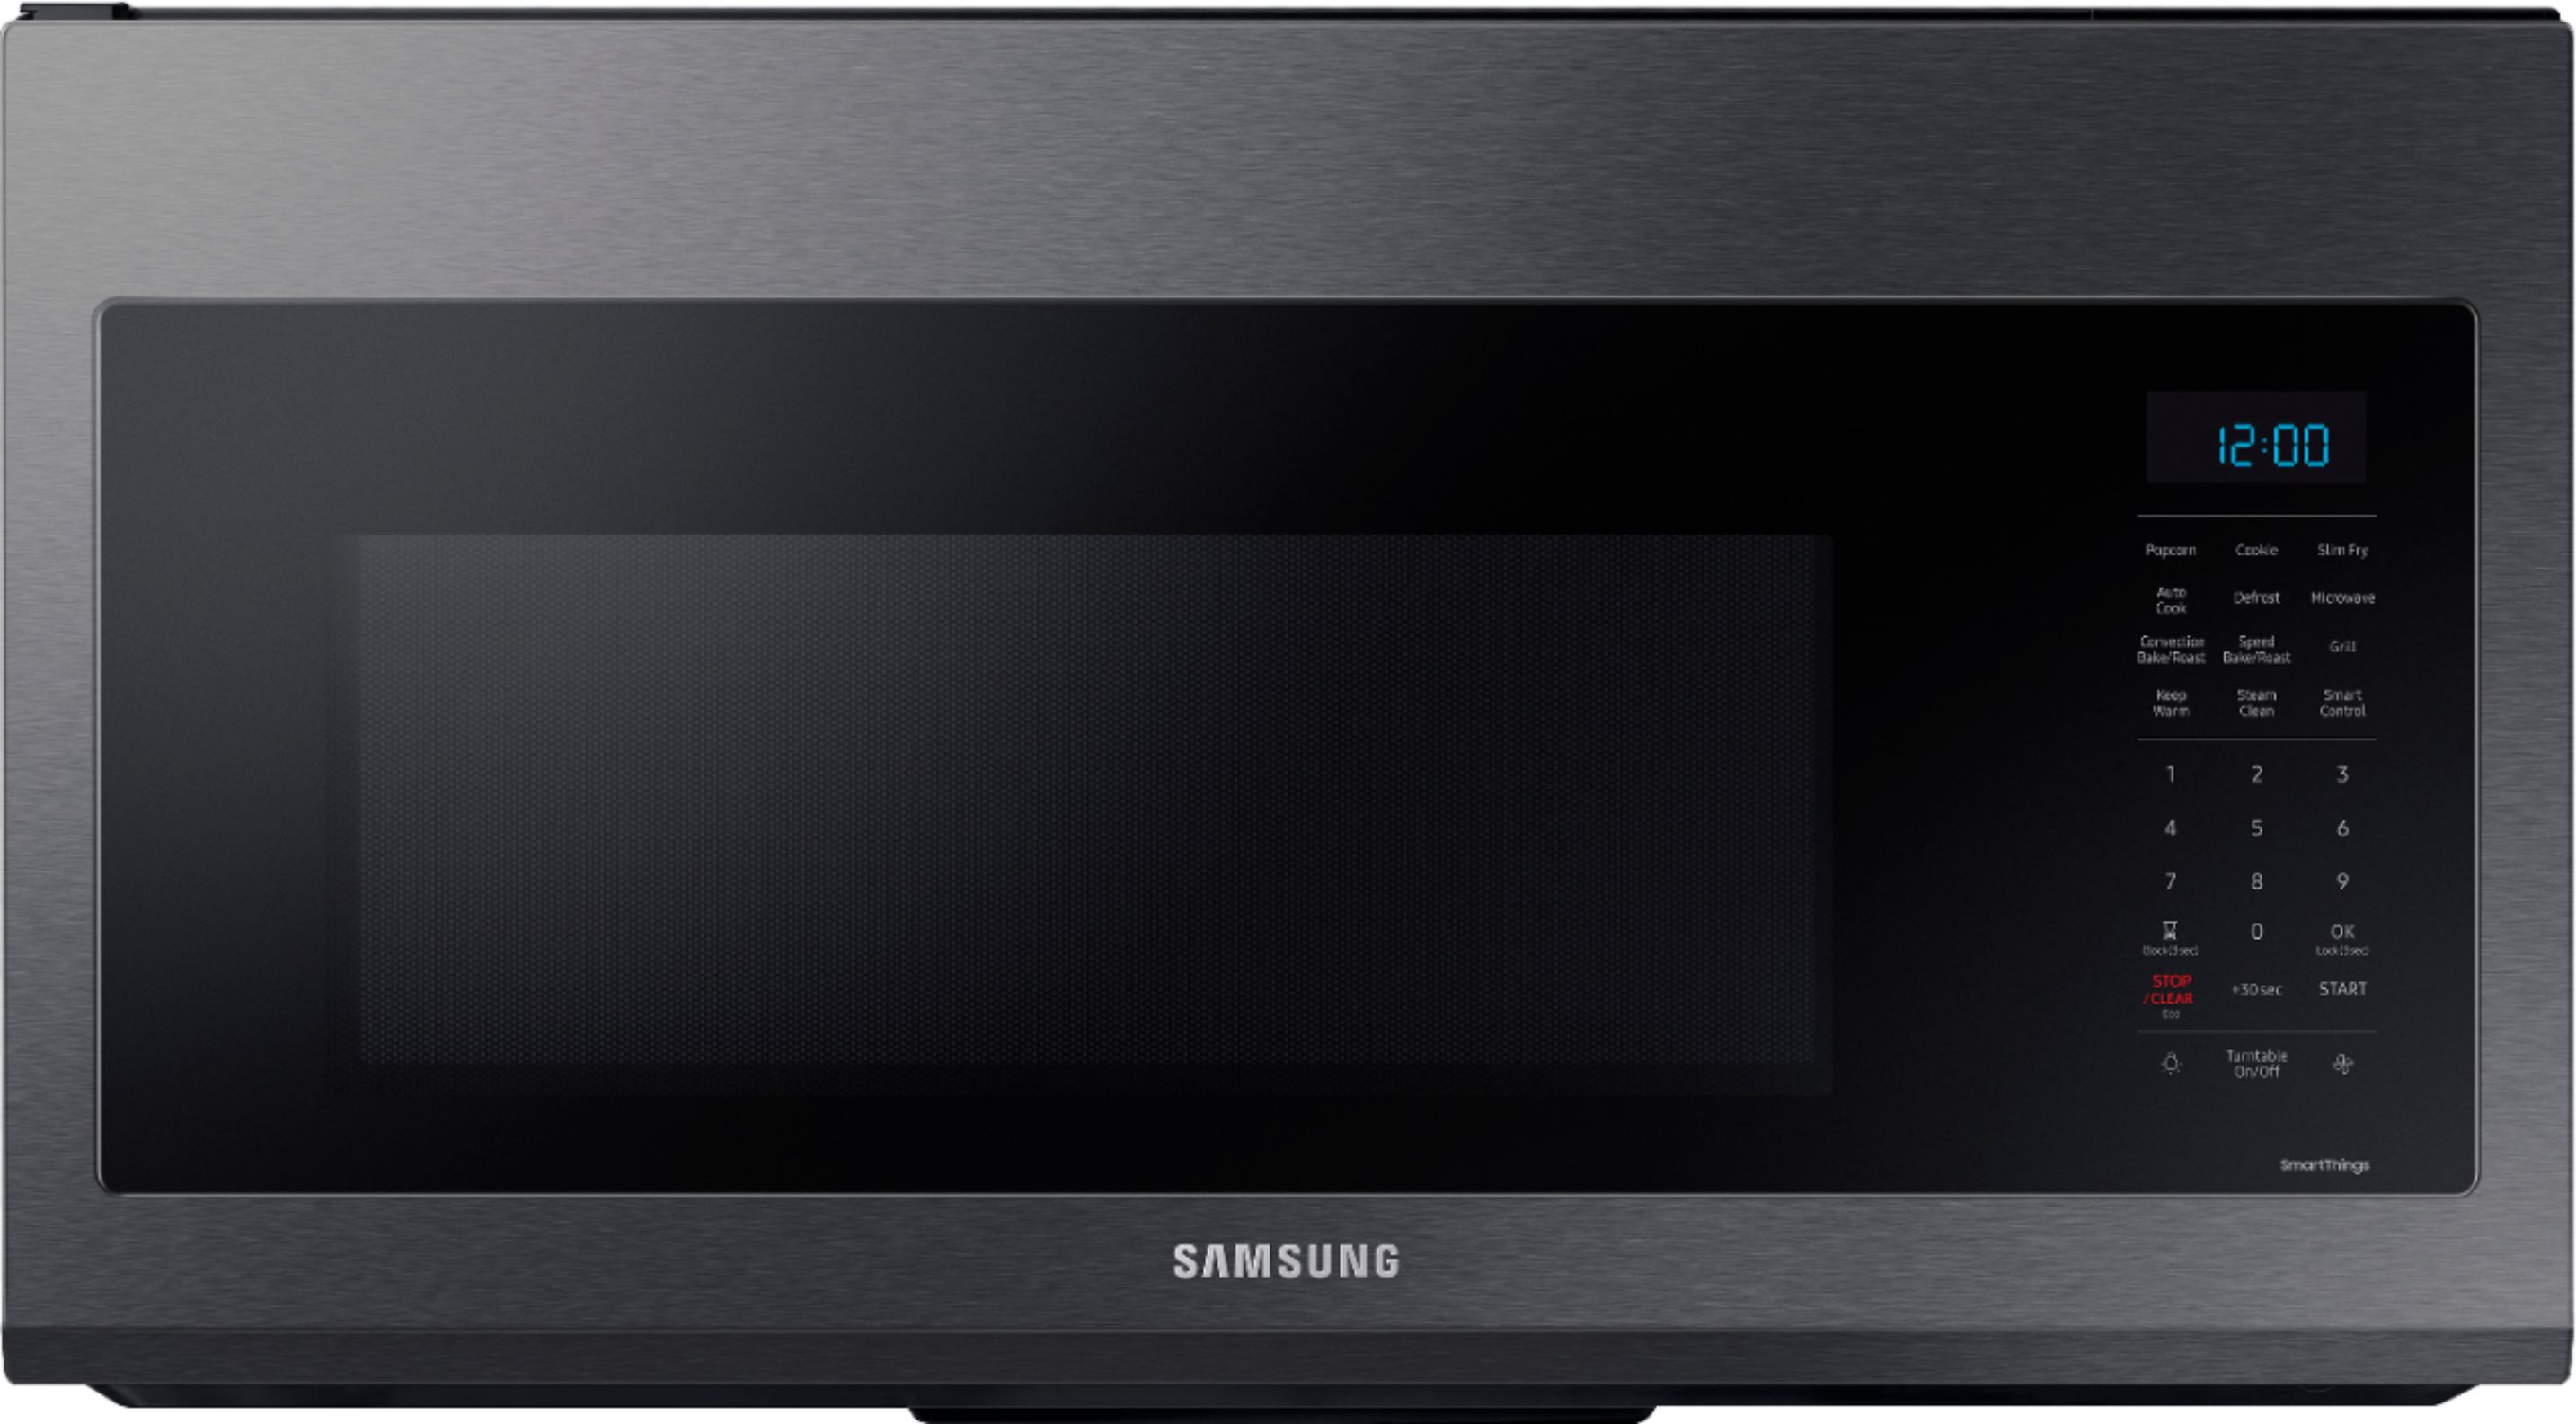 Samsung - 1.7 cu. ft. Over-the-Range Convection Microwave with WiFi - Black stainless steel